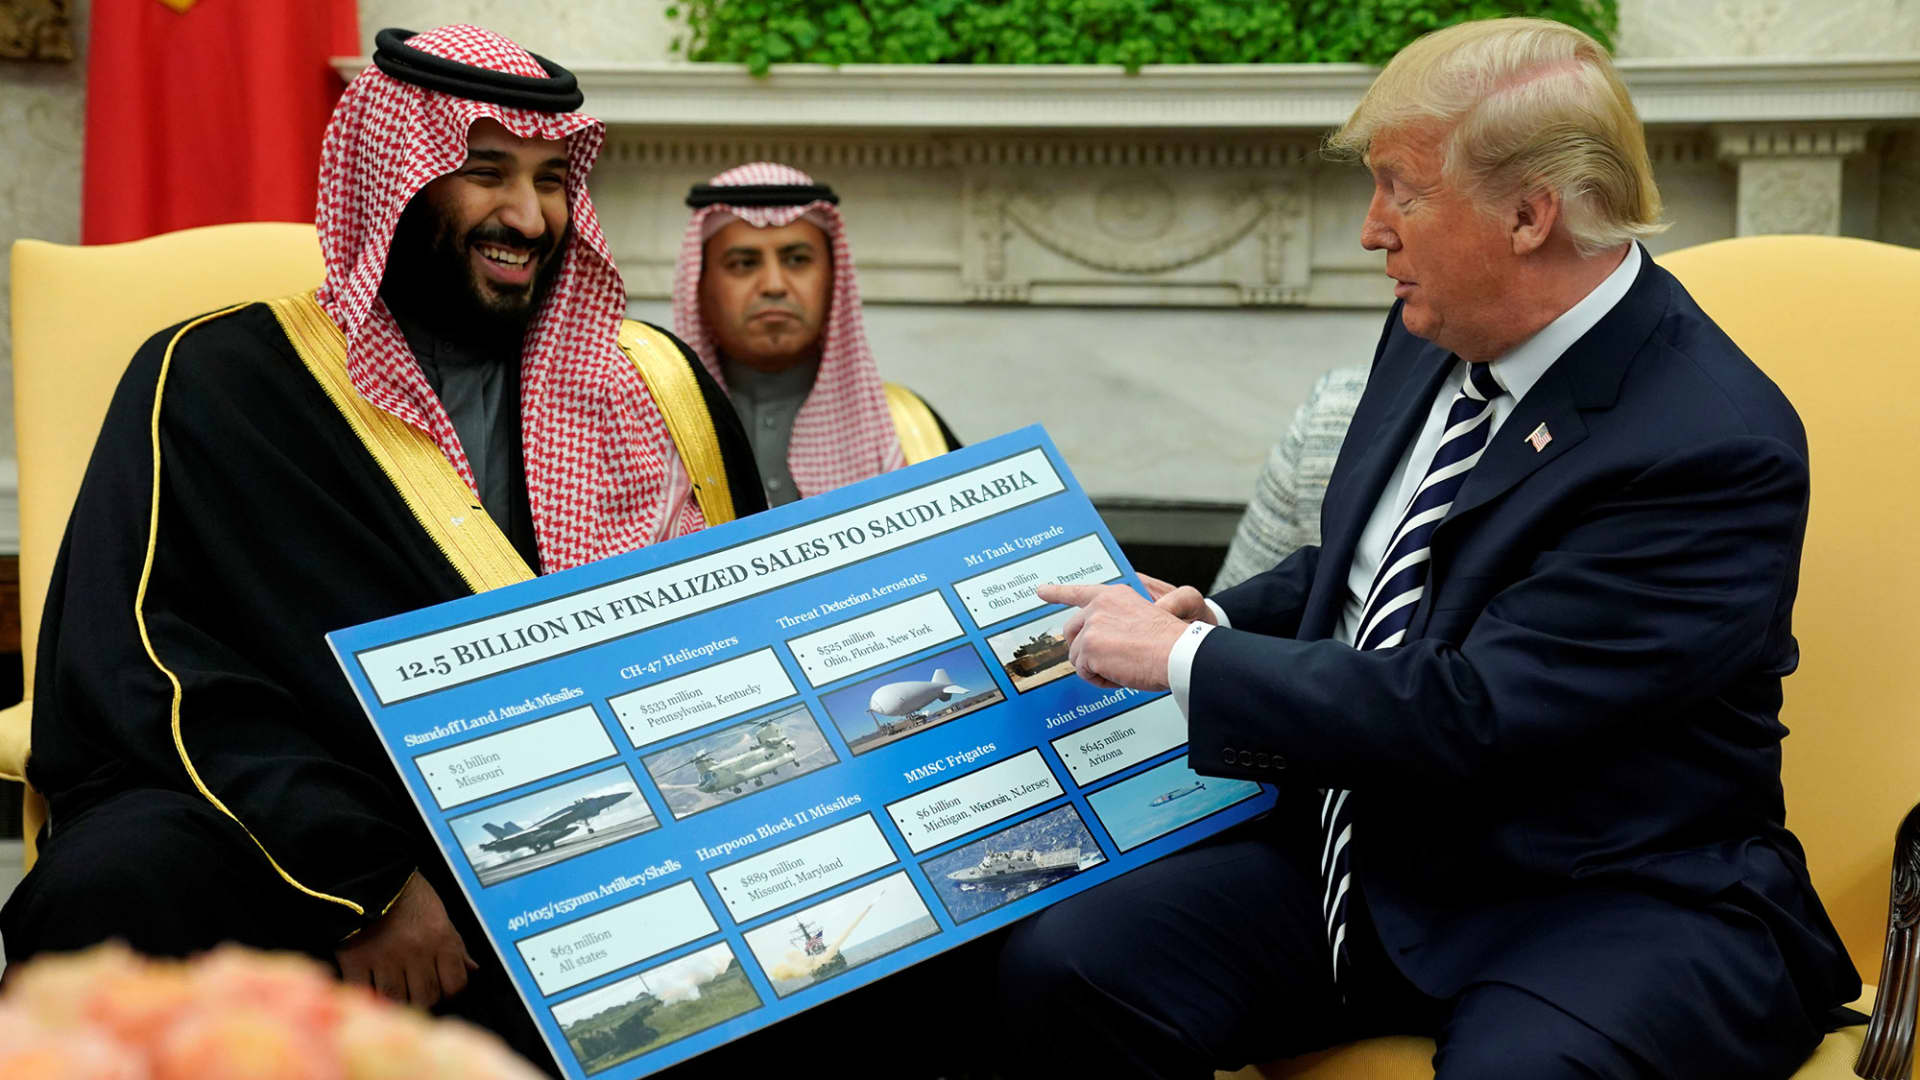 President Donald Trump holds a chart of military hardware sales as he welcomes Saudi Arabia's Crown Prince Mohammed bin Salman in the Oval Office at the White House in Washington, U.S., March 20, 2018.